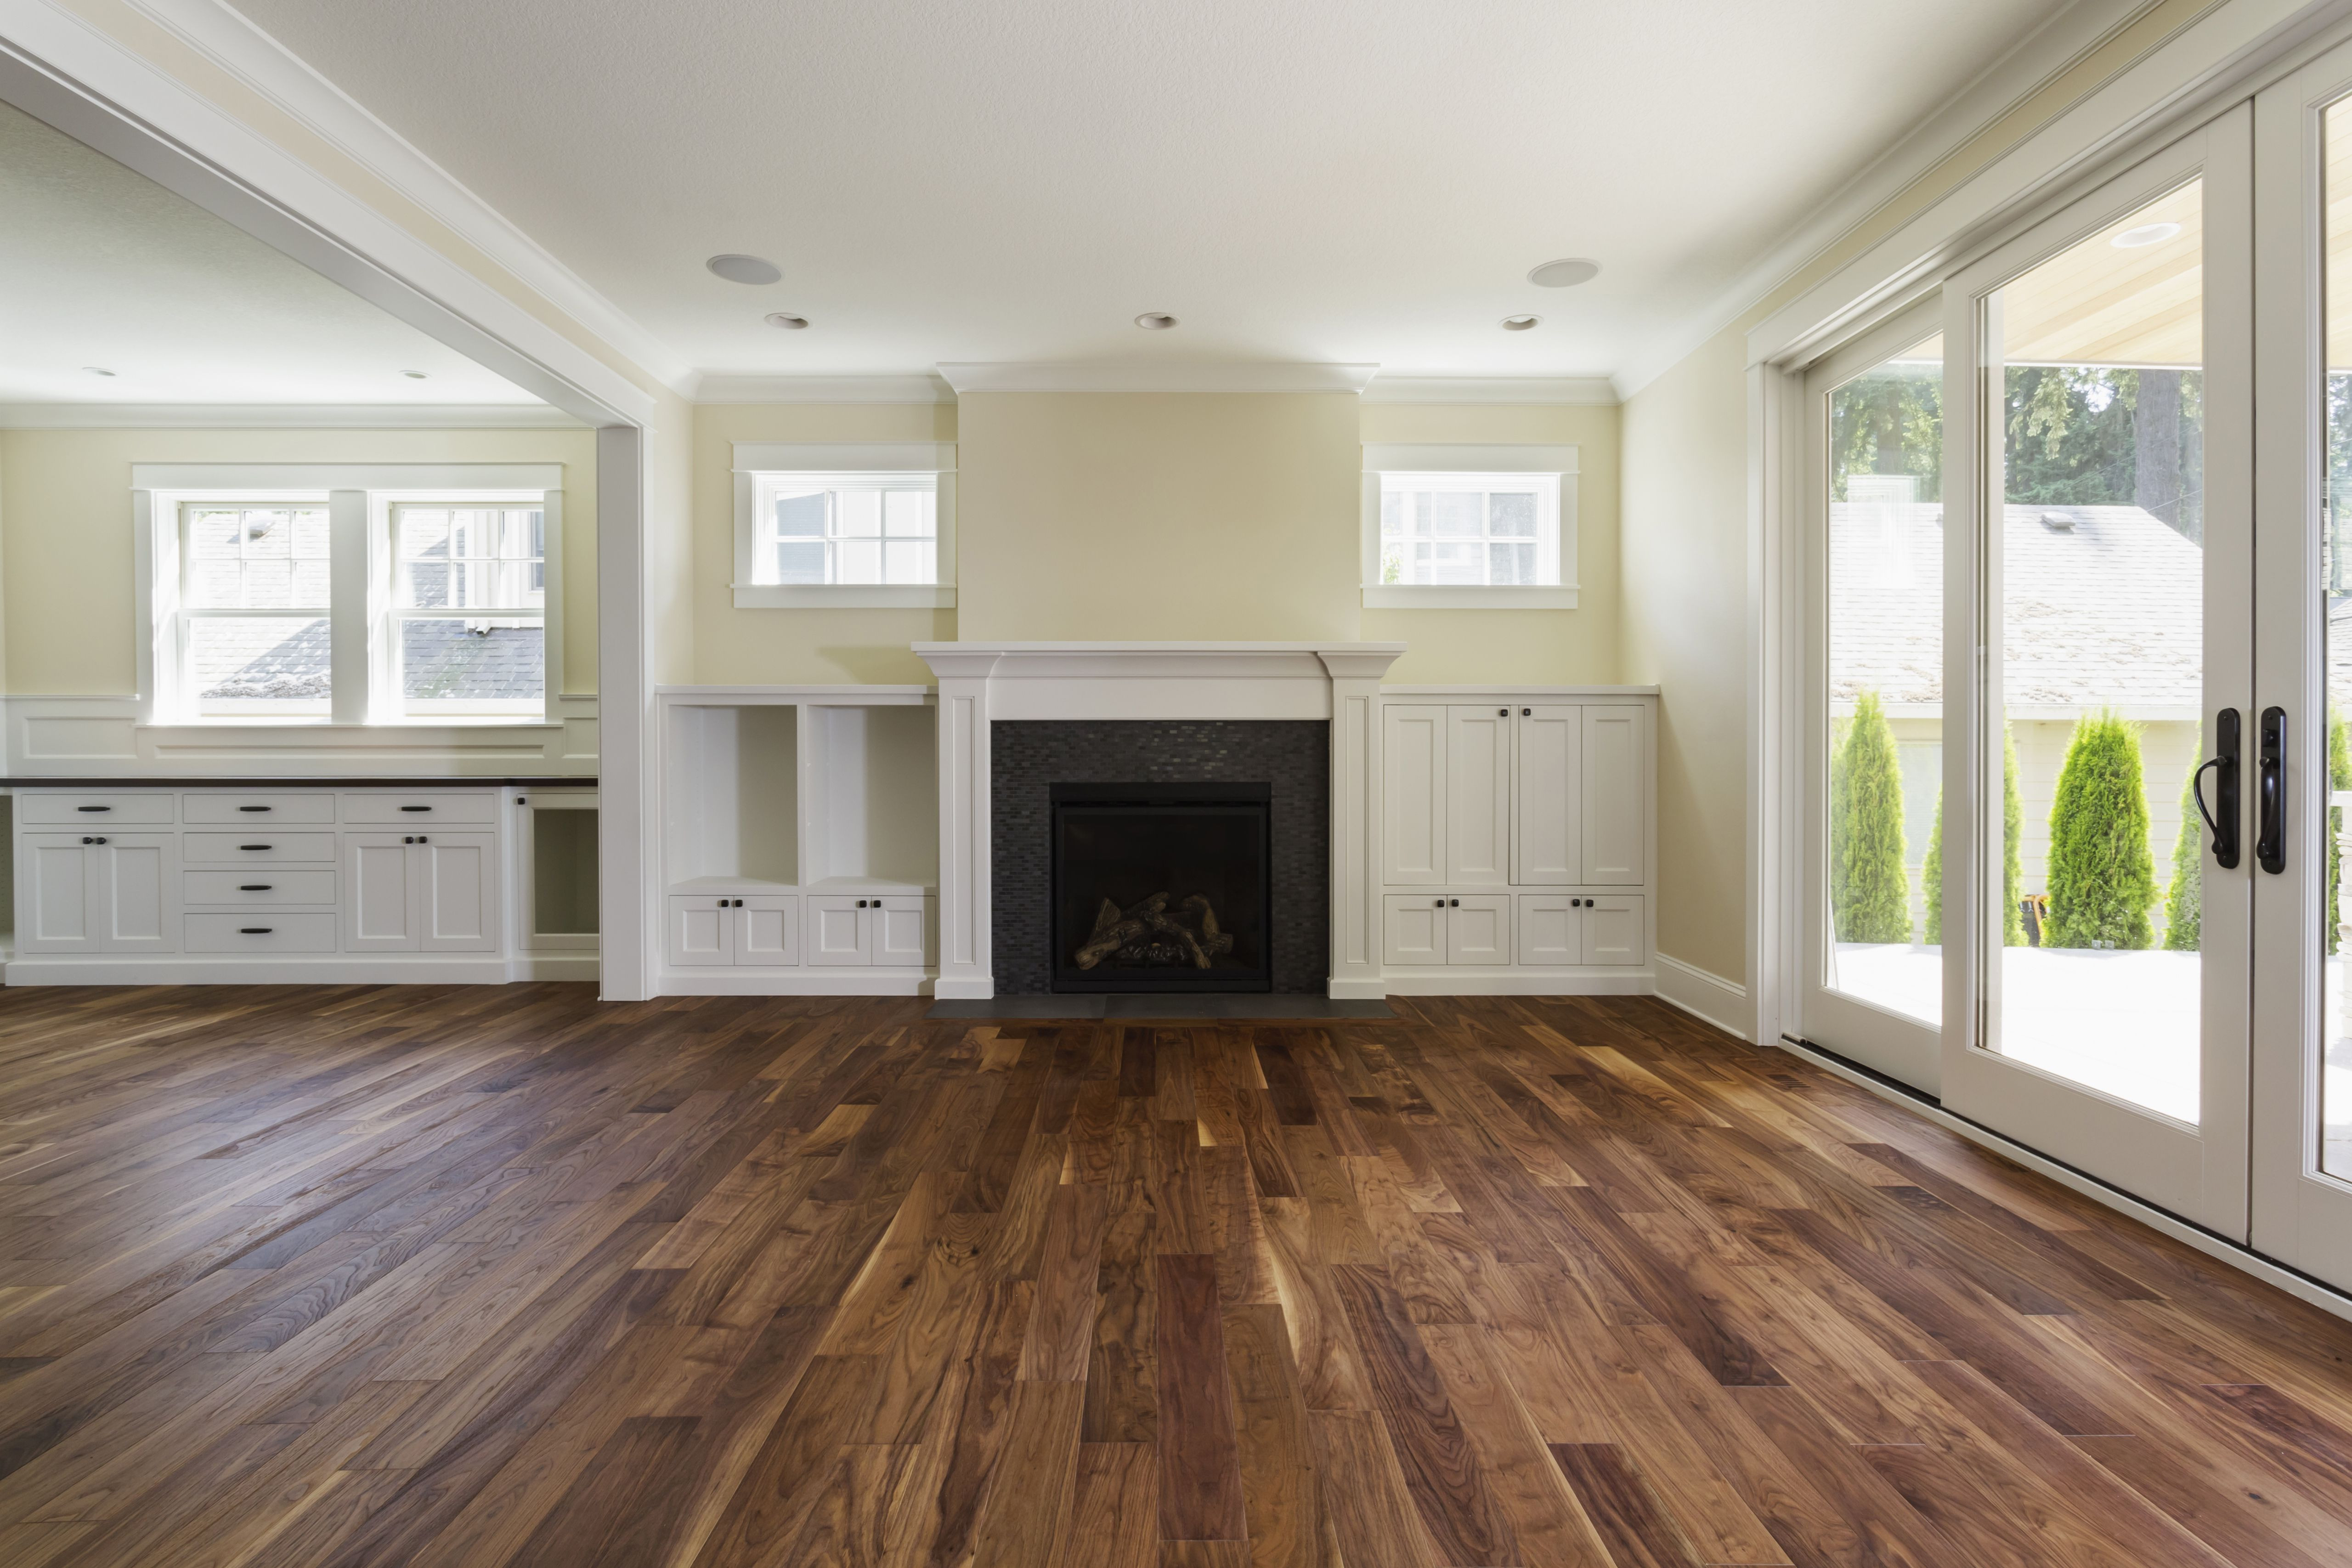 18 Stunning Refinish Hardwood Floors without Sanding Products 2024 free download refinish hardwood floors without sanding products of the pros and cons of prefinished hardwood flooring in fireplace and built in shelves in living room 482143011 57bef8e33df78cc16e035397